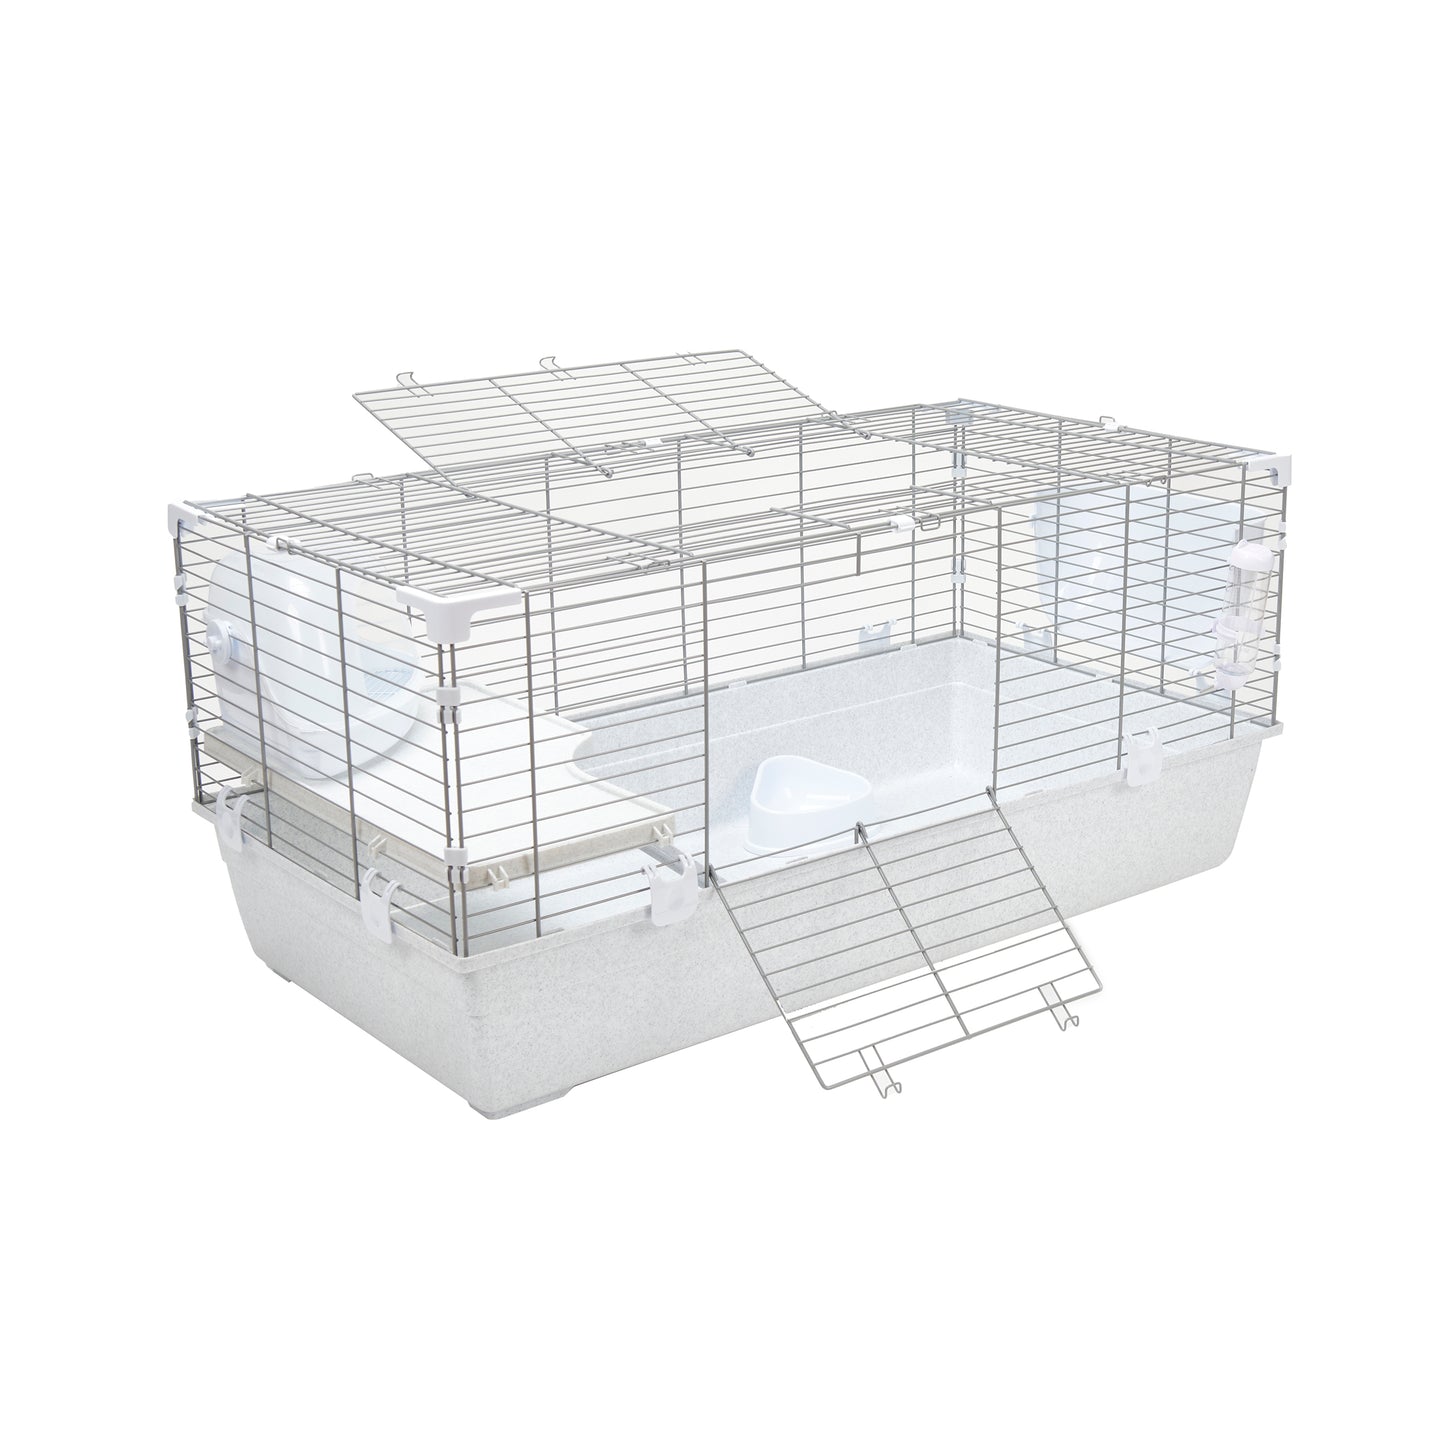 4522 - Roger R4 100cm Cage (Box of 2)